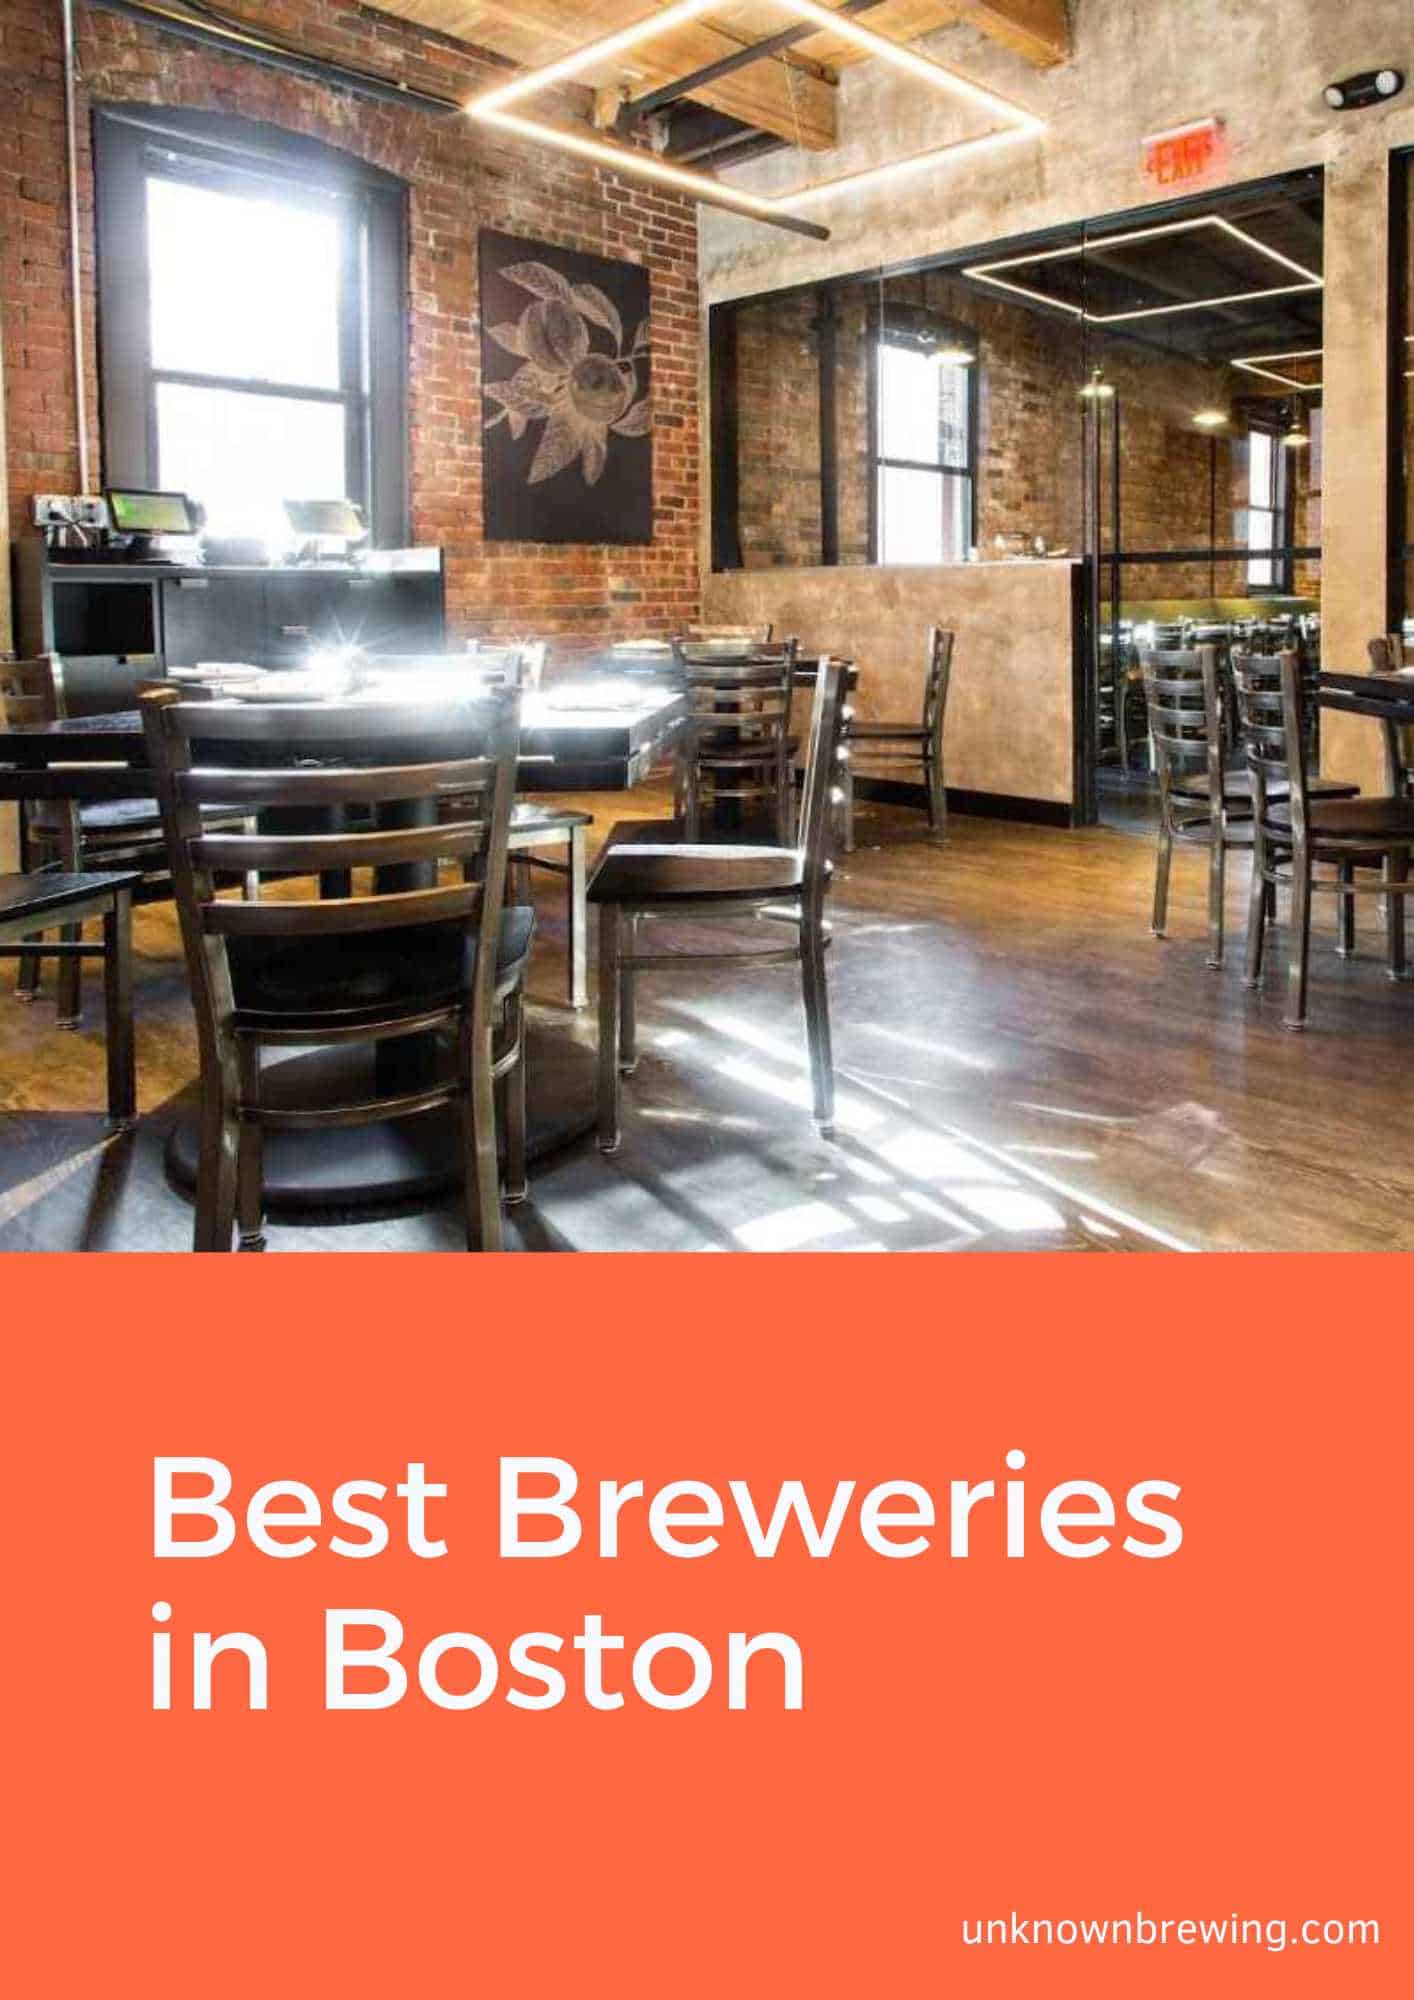 Best Breweries in Boston To Visit Now